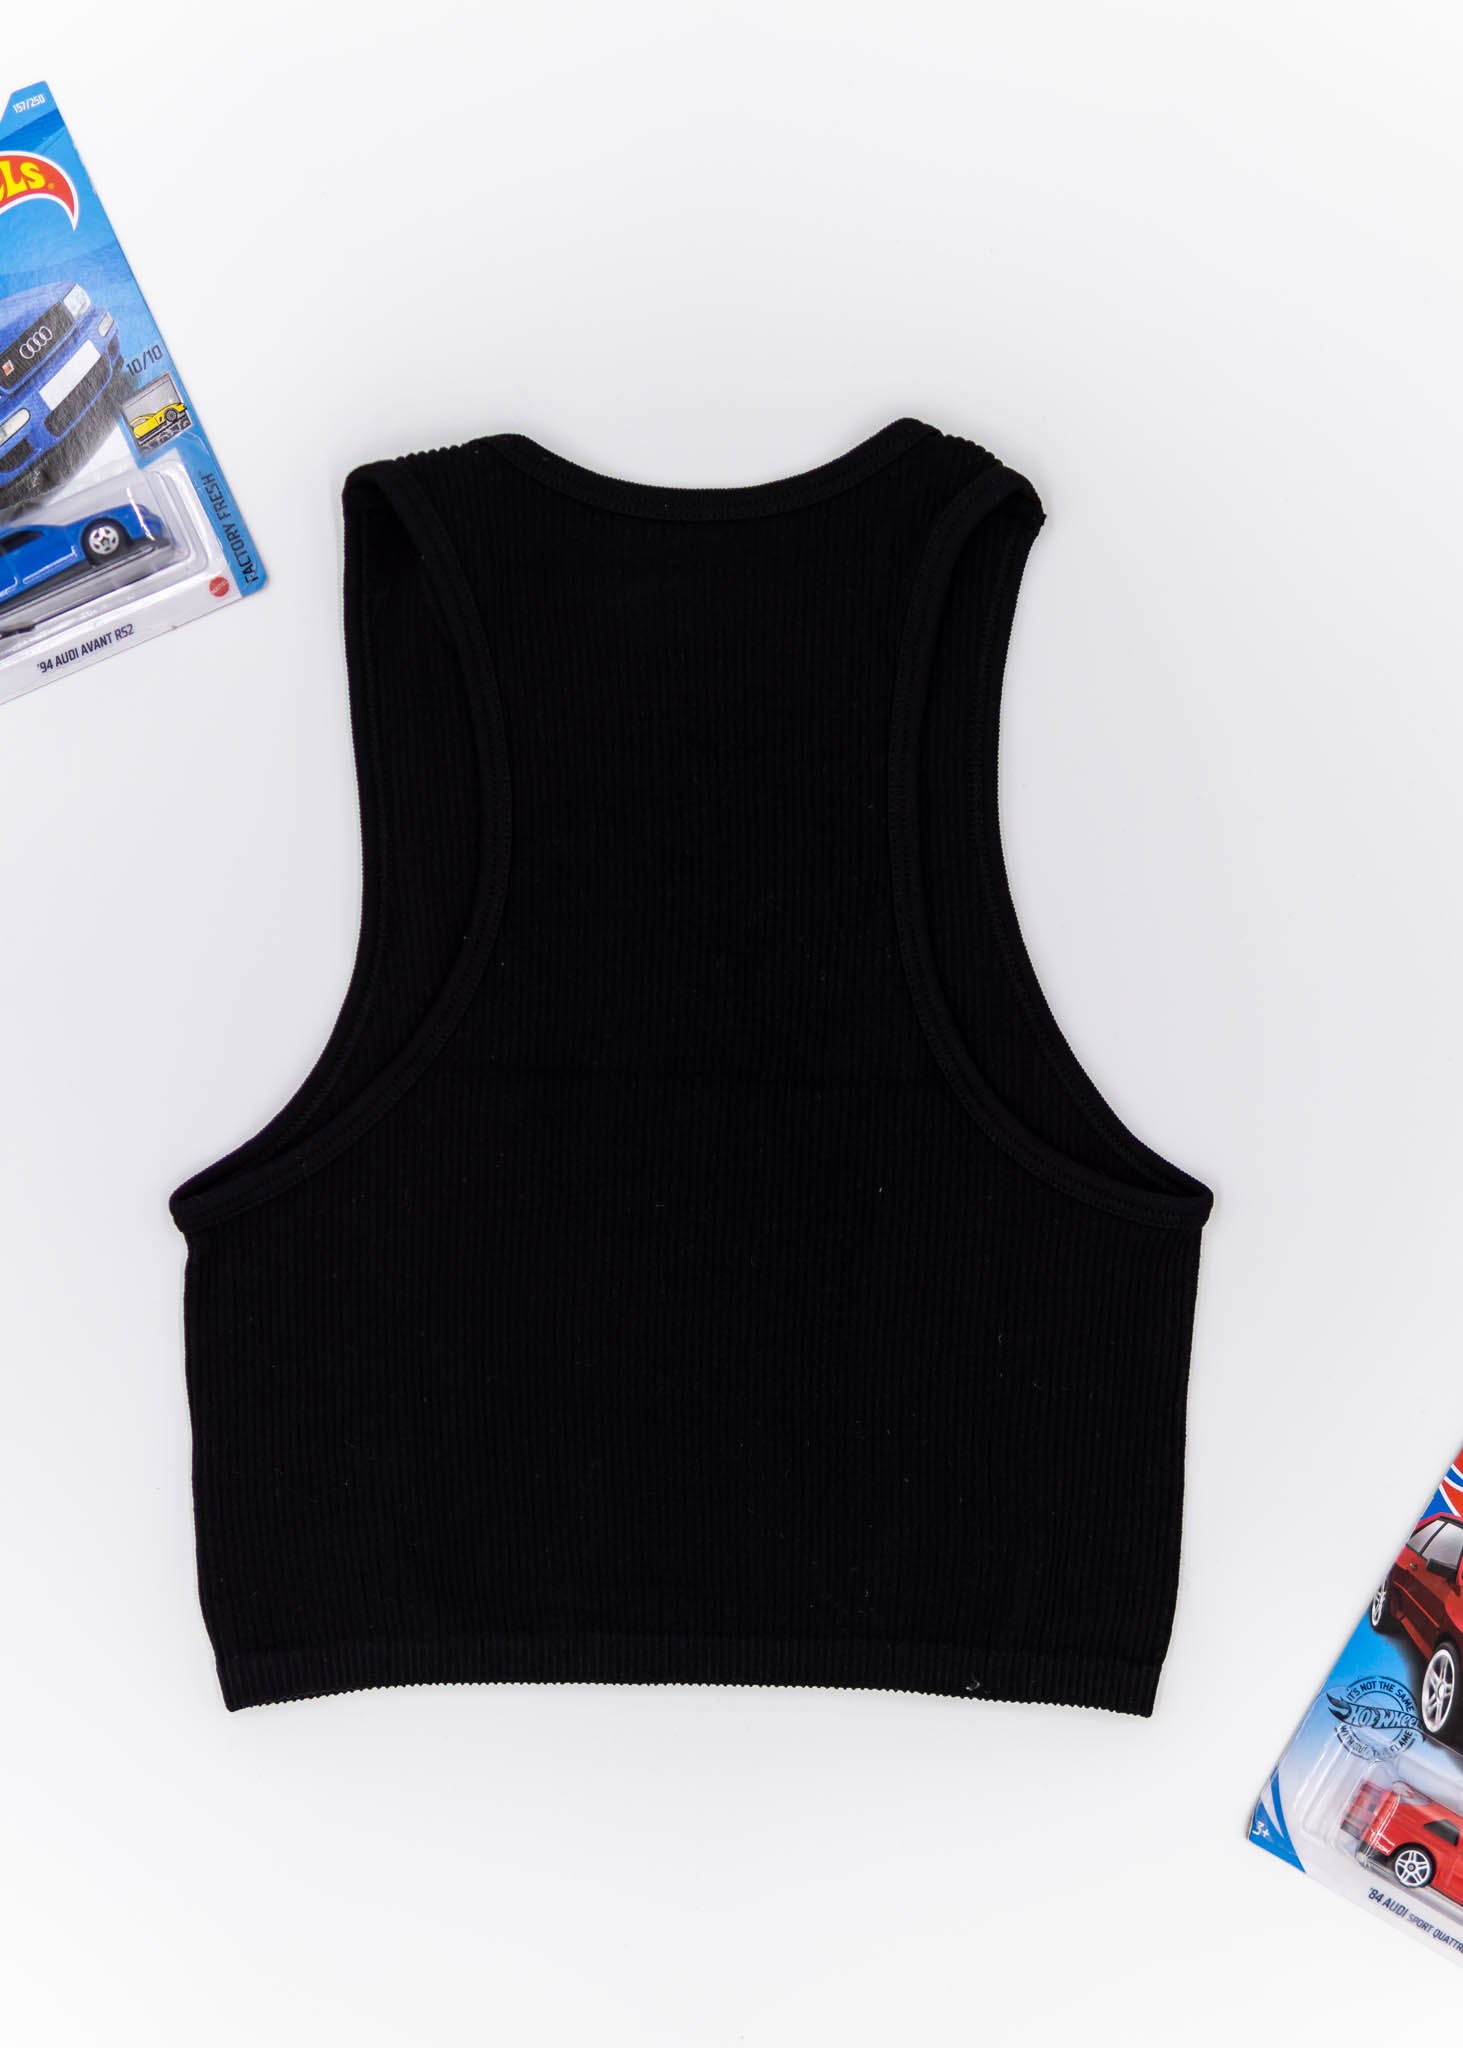 A black Audi crop top for women. Photo is a blank canvas back view of the top with an embroidered imola yellow Audi B5 RS4. Fabric composition is polyester, and elastine. The material is stretchy, ribbed, and non-transparent. The style of this shirt is sleeveless, with a crewneck neckline.